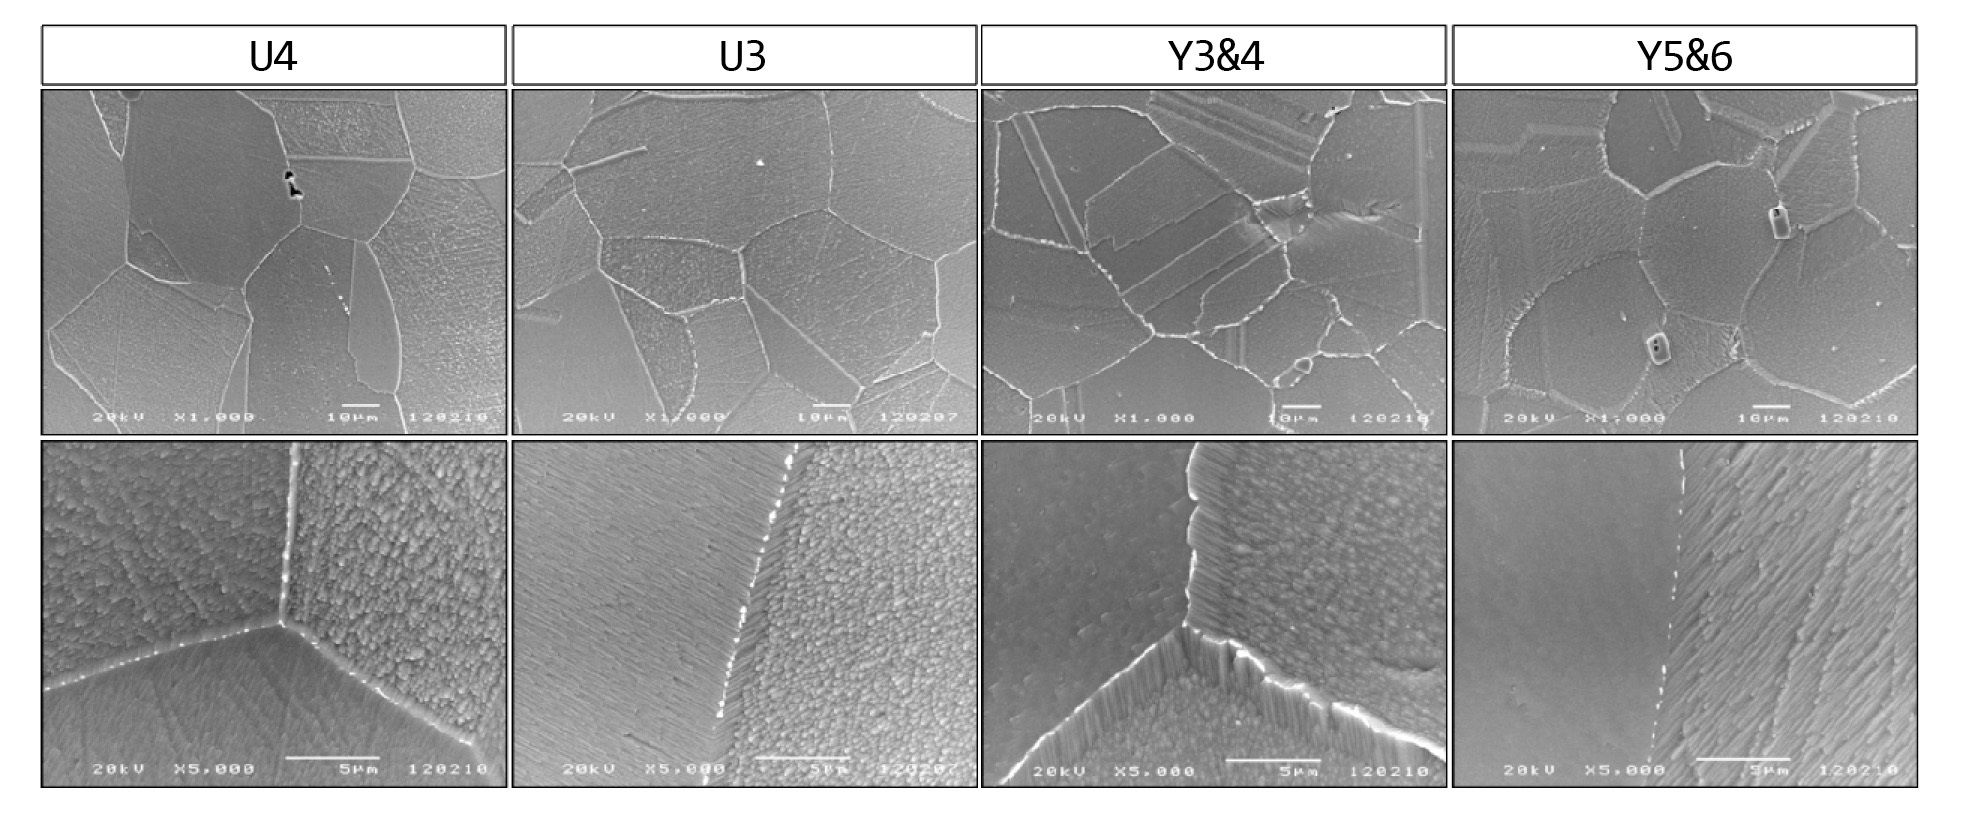 Microstructures of SG Tubes in U4, U3, Y3&4, and Y5&6 Units